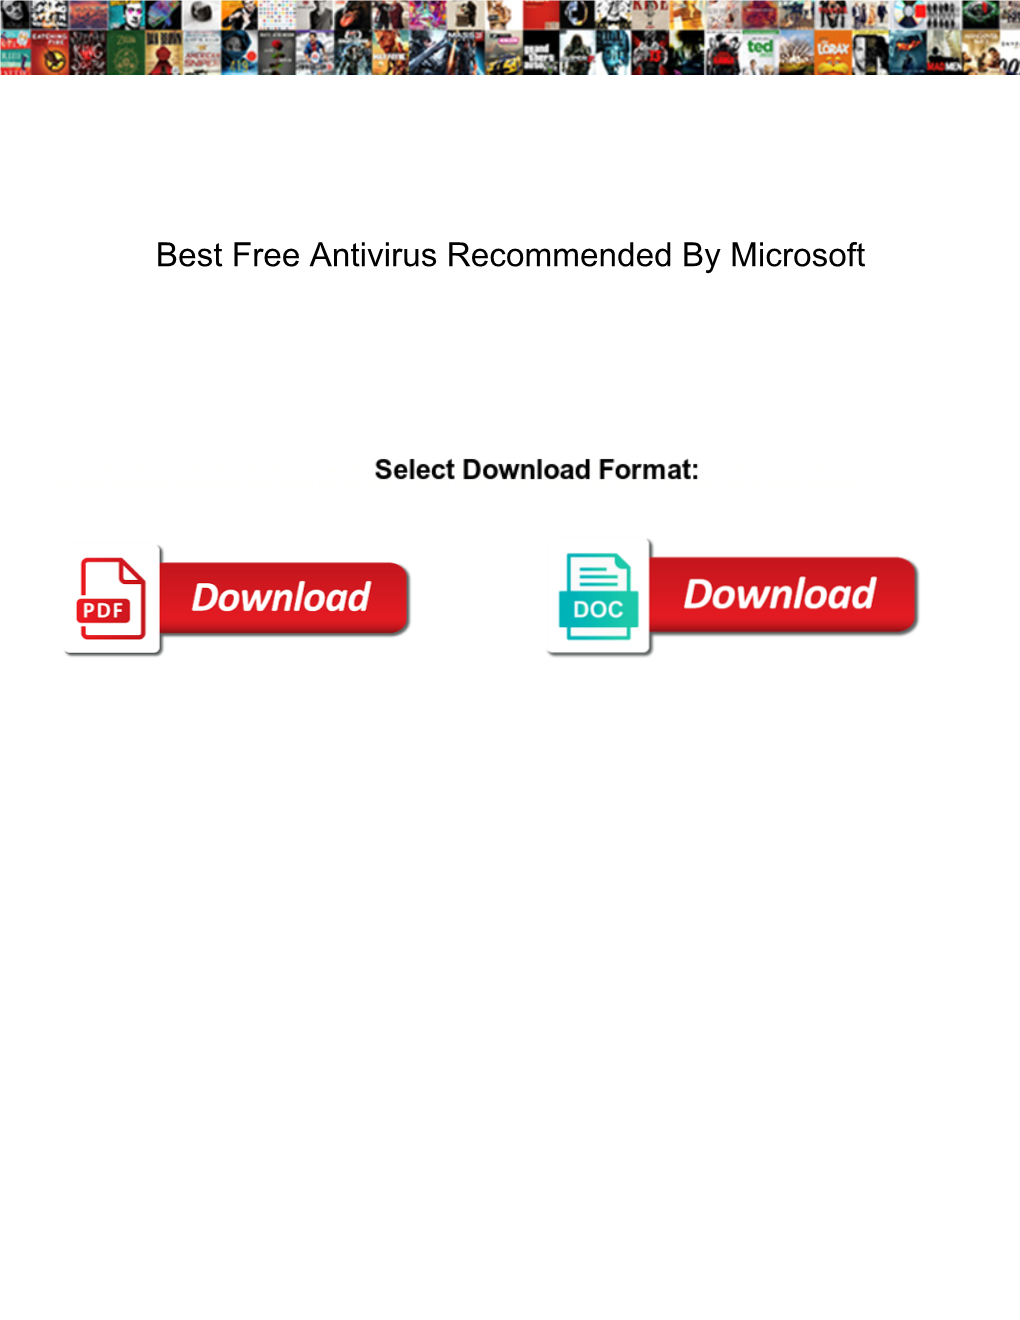 Best Free Antivirus Recommended by Microsoft